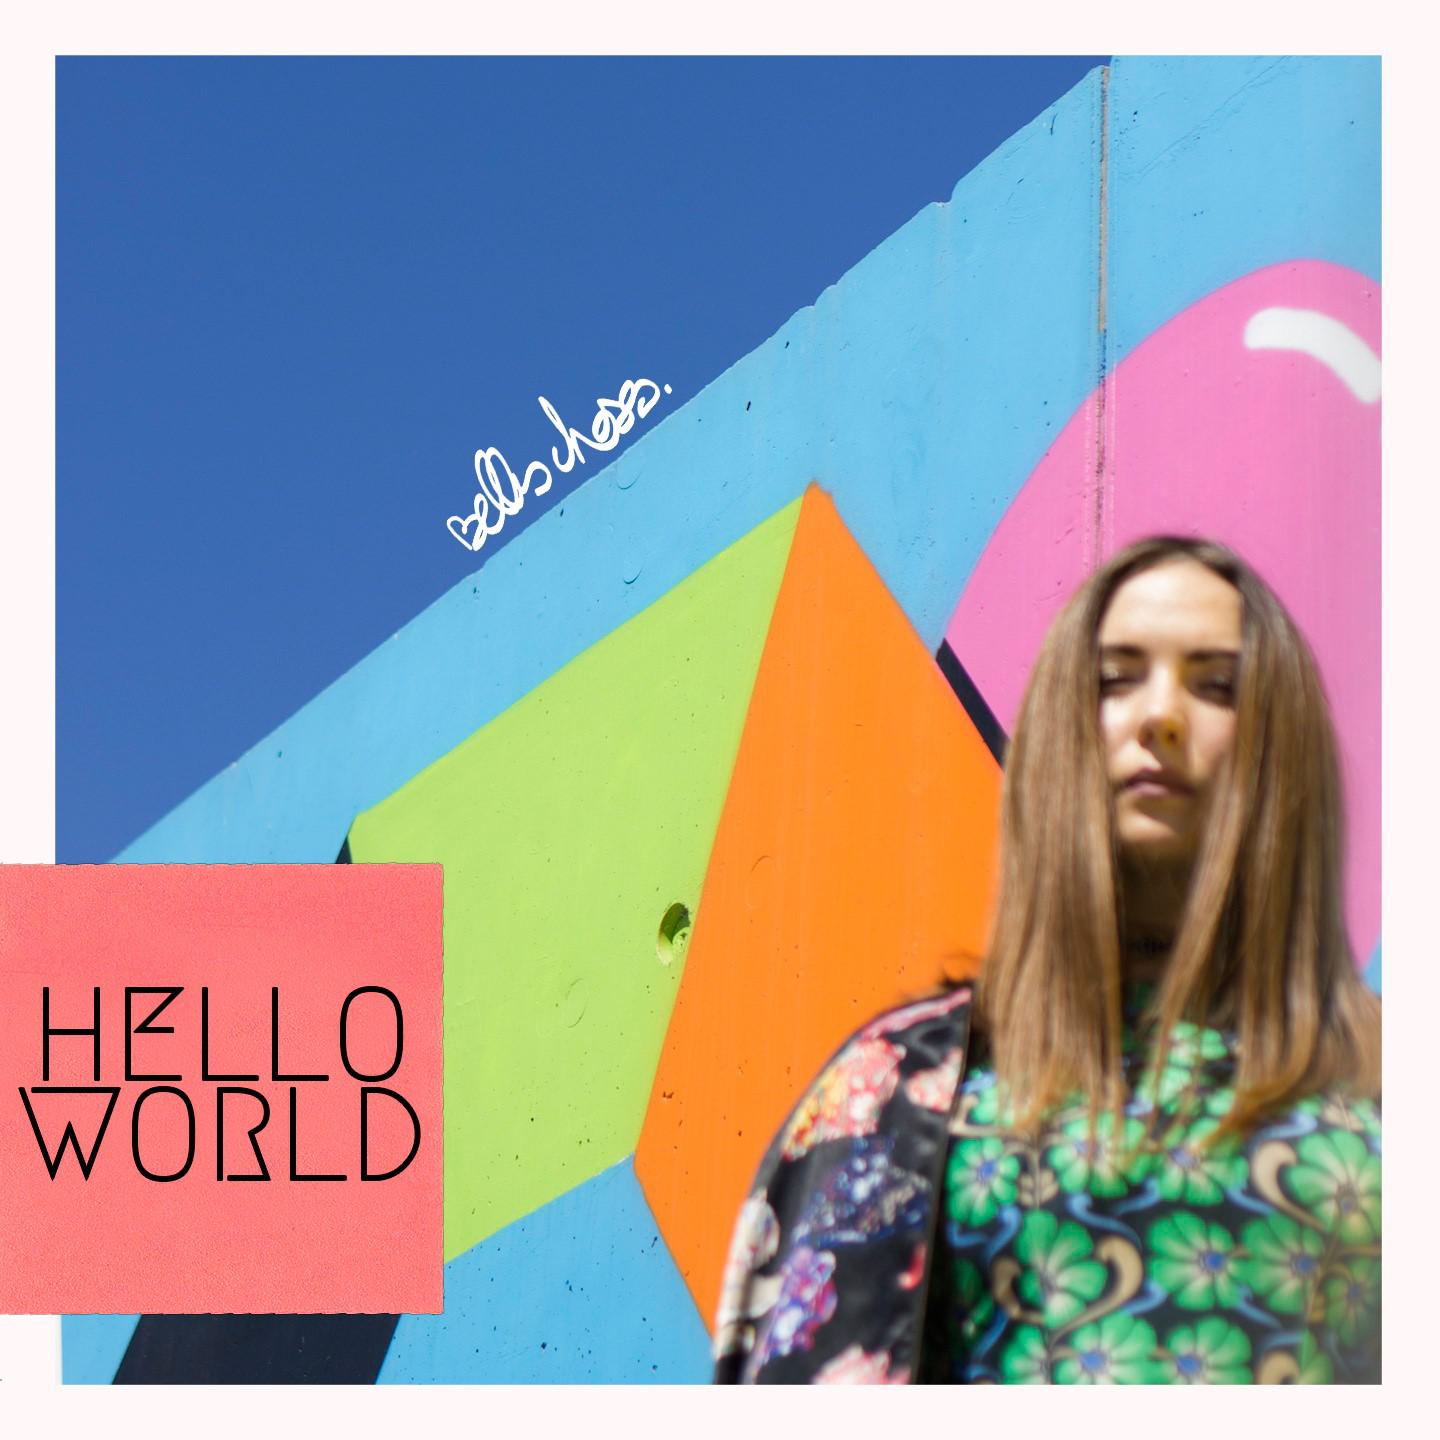 Hello World by Belles Choses